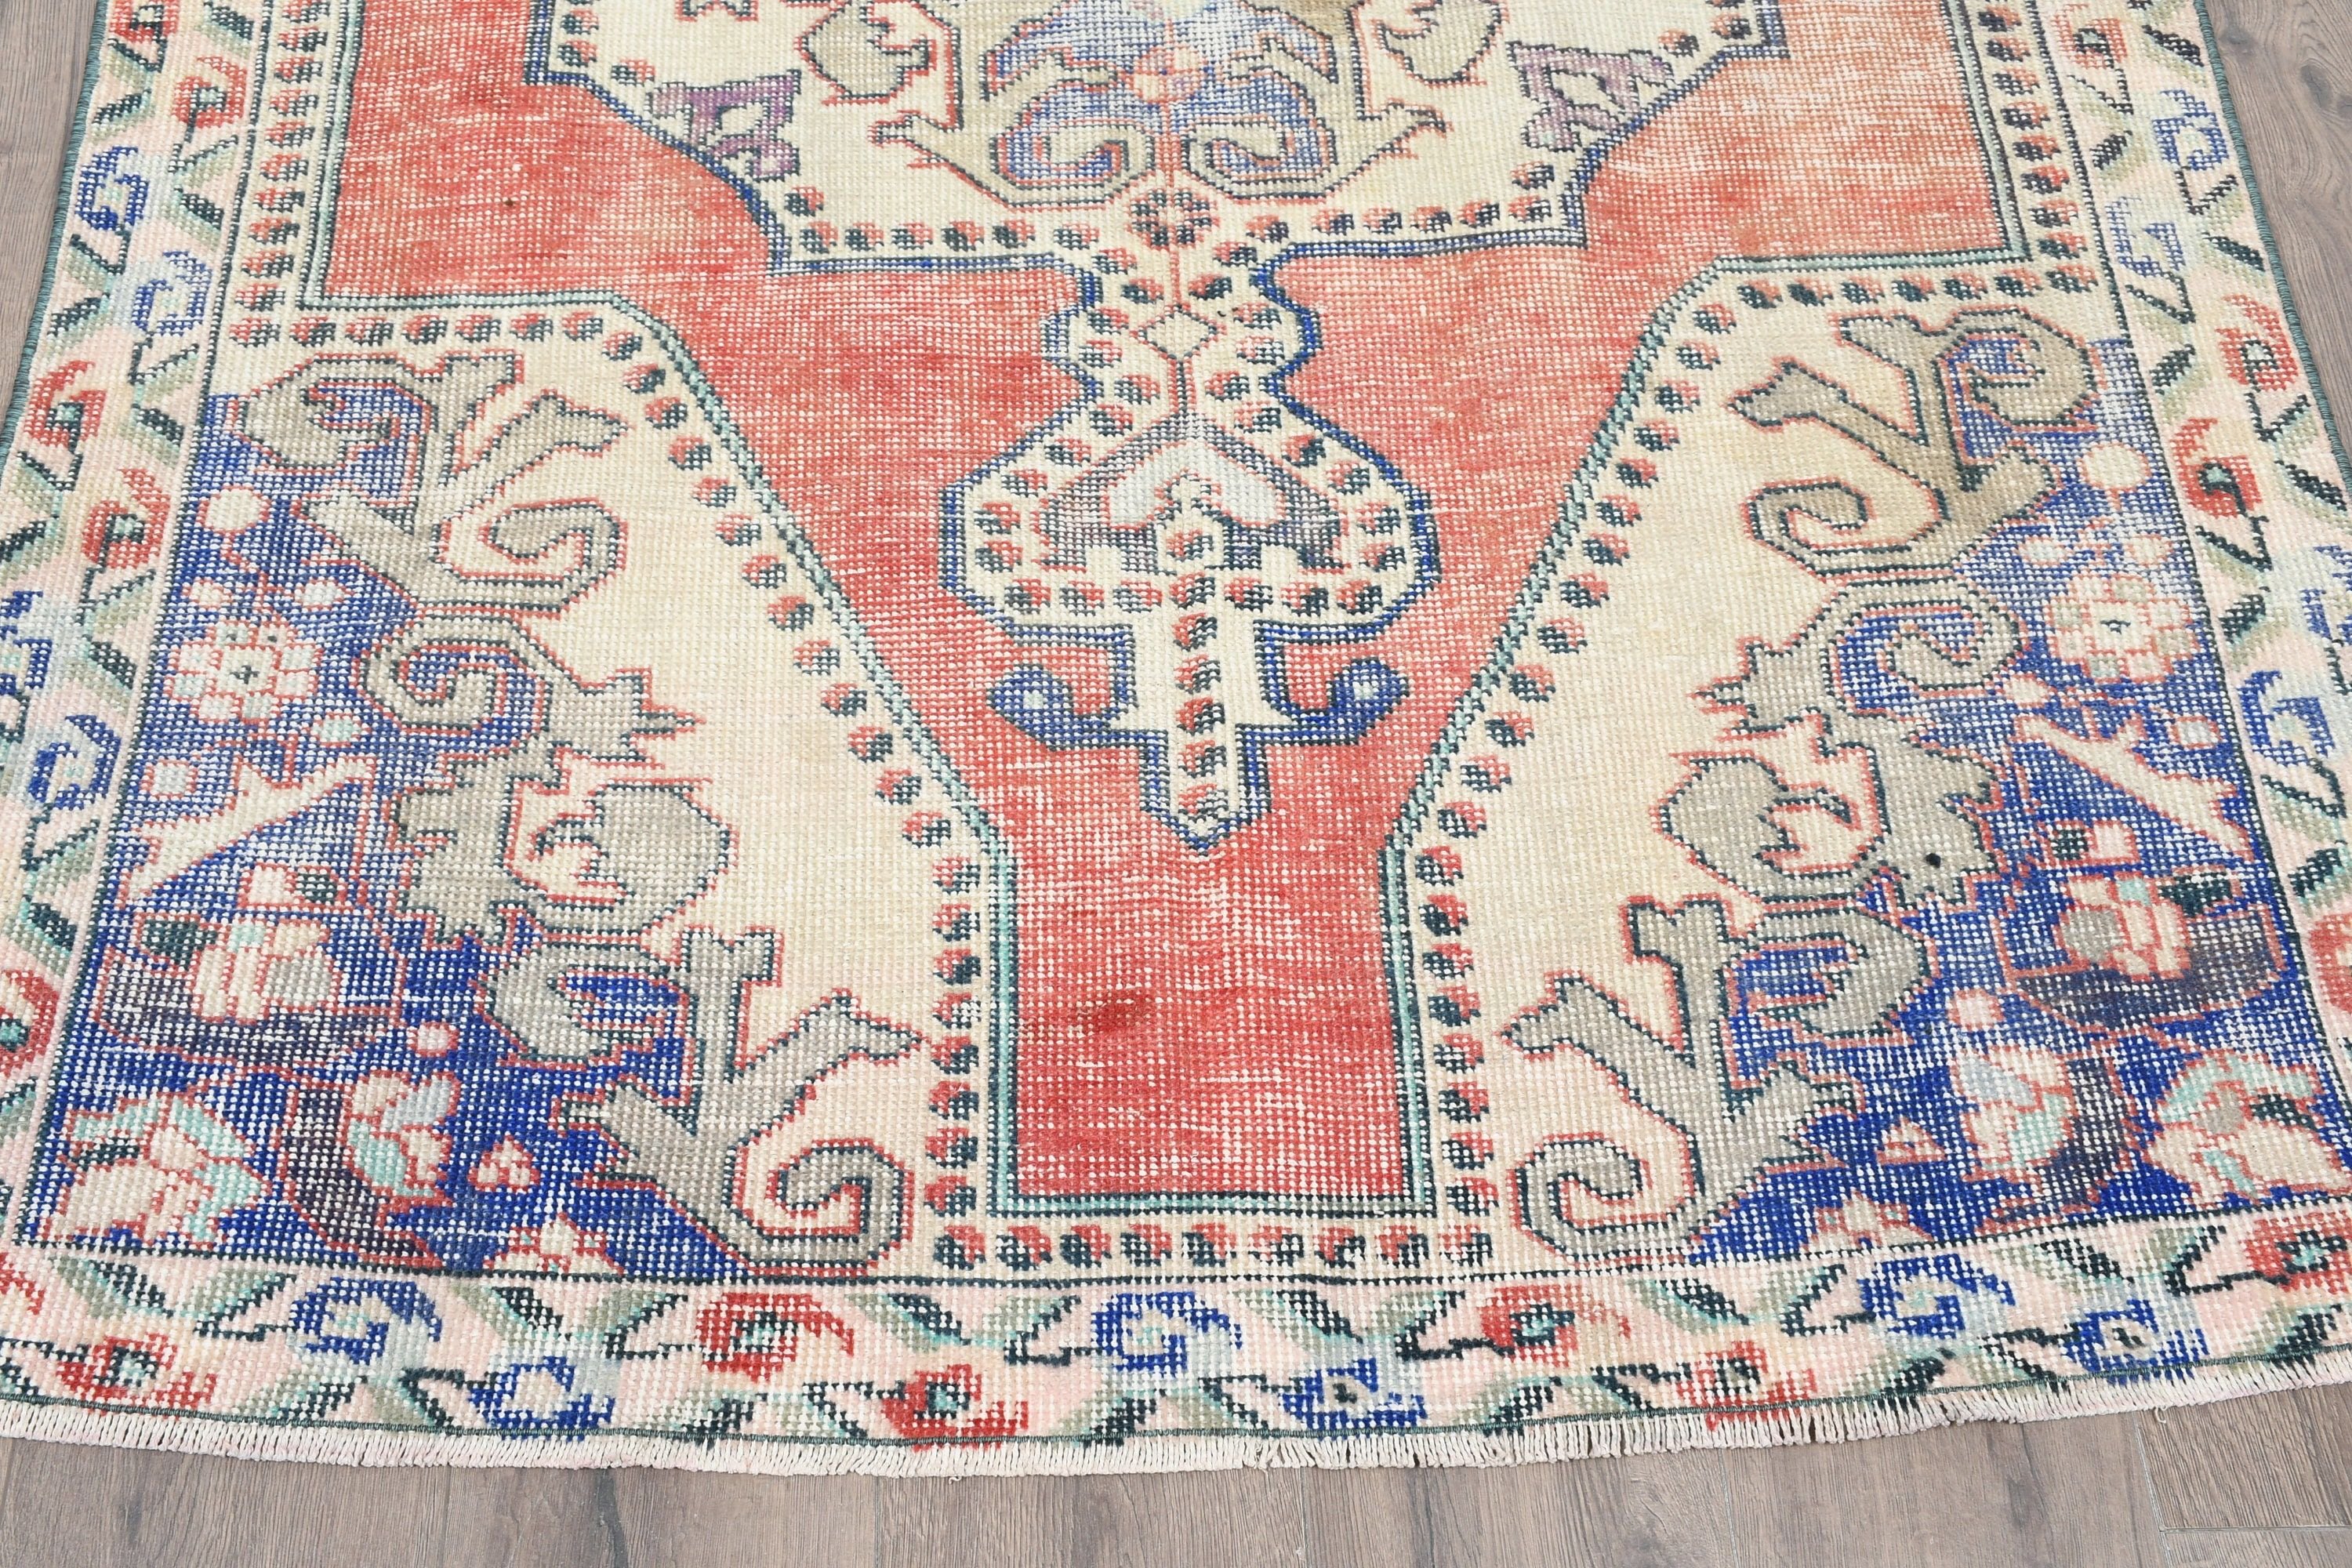 4.3x7.3 ft Area Rugs, Vintage Rug, Bedroom Rugs, Oushak Rugs, Vintage Decor Rug, Red Antique Rug, Rugs for Area, Turkish Rugs, Kitchen Rugs